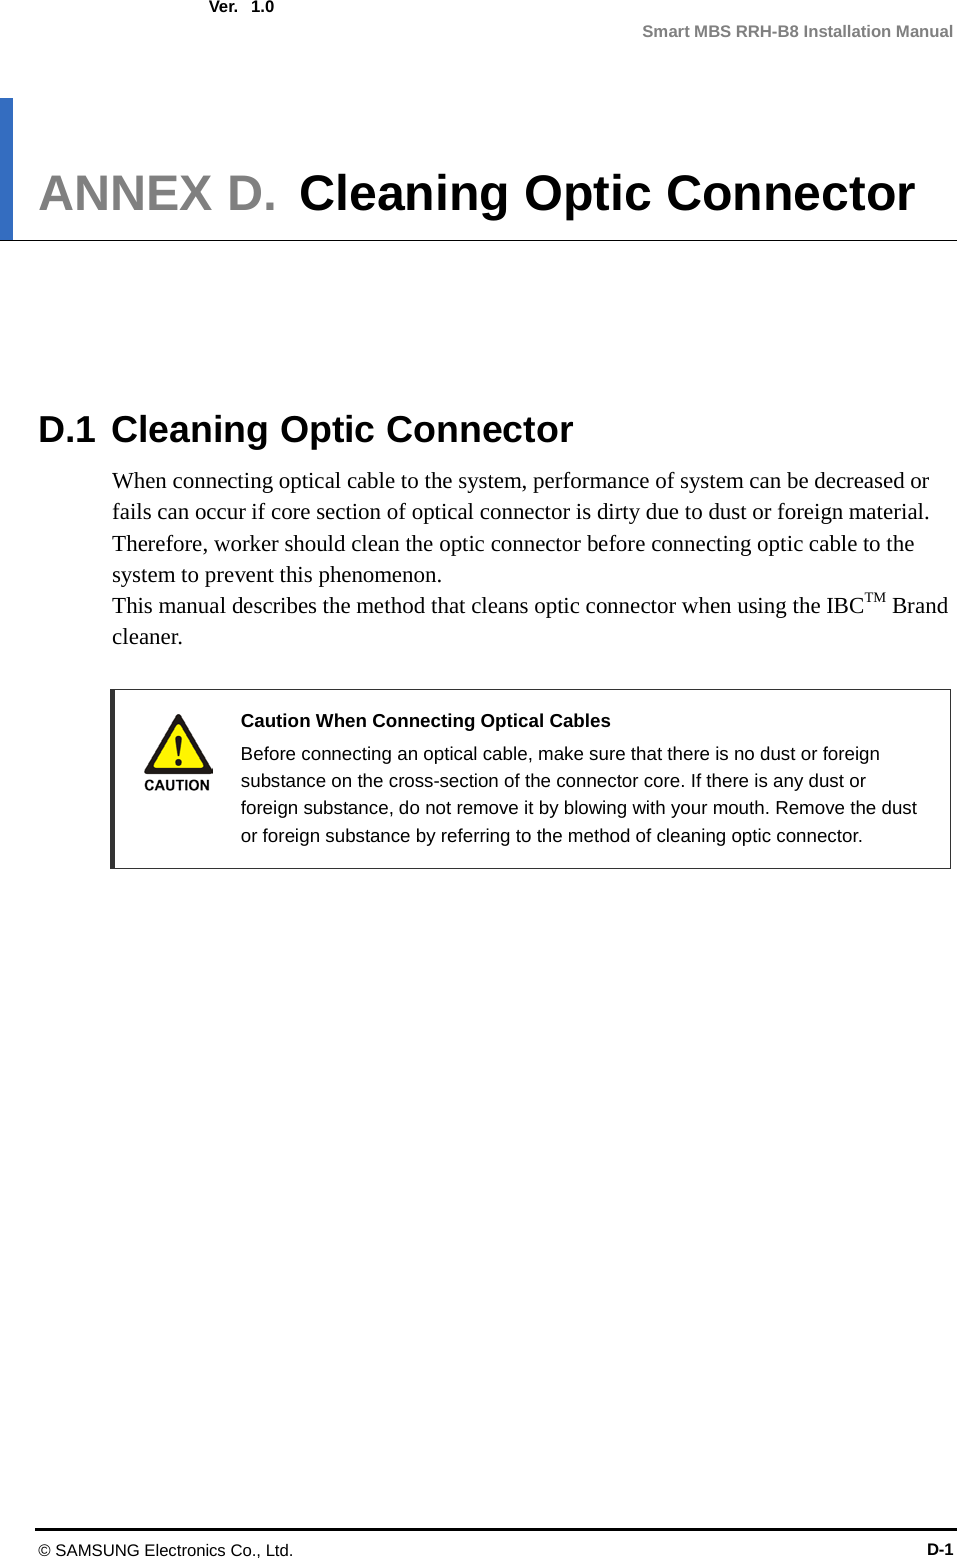  Ver.  Smart MBS RRH-B8 Installation Manual 1.0 ANNEX D. Cleaning Optic Connector      D.1 Cleaning Optic Connector When connecting optical cable to the system, performance of system can be decreased or fails can occur if core section of optical connector is dirty due to dust or foreign material. Therefore, worker should clean the optic connector before connecting optic cable to the system to prevent this phenomenon. This manual describes the method that cleans optic connector when using the IBCTM Brand cleaner.   Caution When Connecting Optical Cables  Before connecting an optical cable, make sure that there is no dust or foreign substance on the cross-section of the connector core. If there is any dust or foreign substance, do not remove it by blowing with your mouth. Remove the dust or foreign substance by referring to the method of cleaning optic connector. © SAMSUNG Electronics Co., Ltd. D-1 